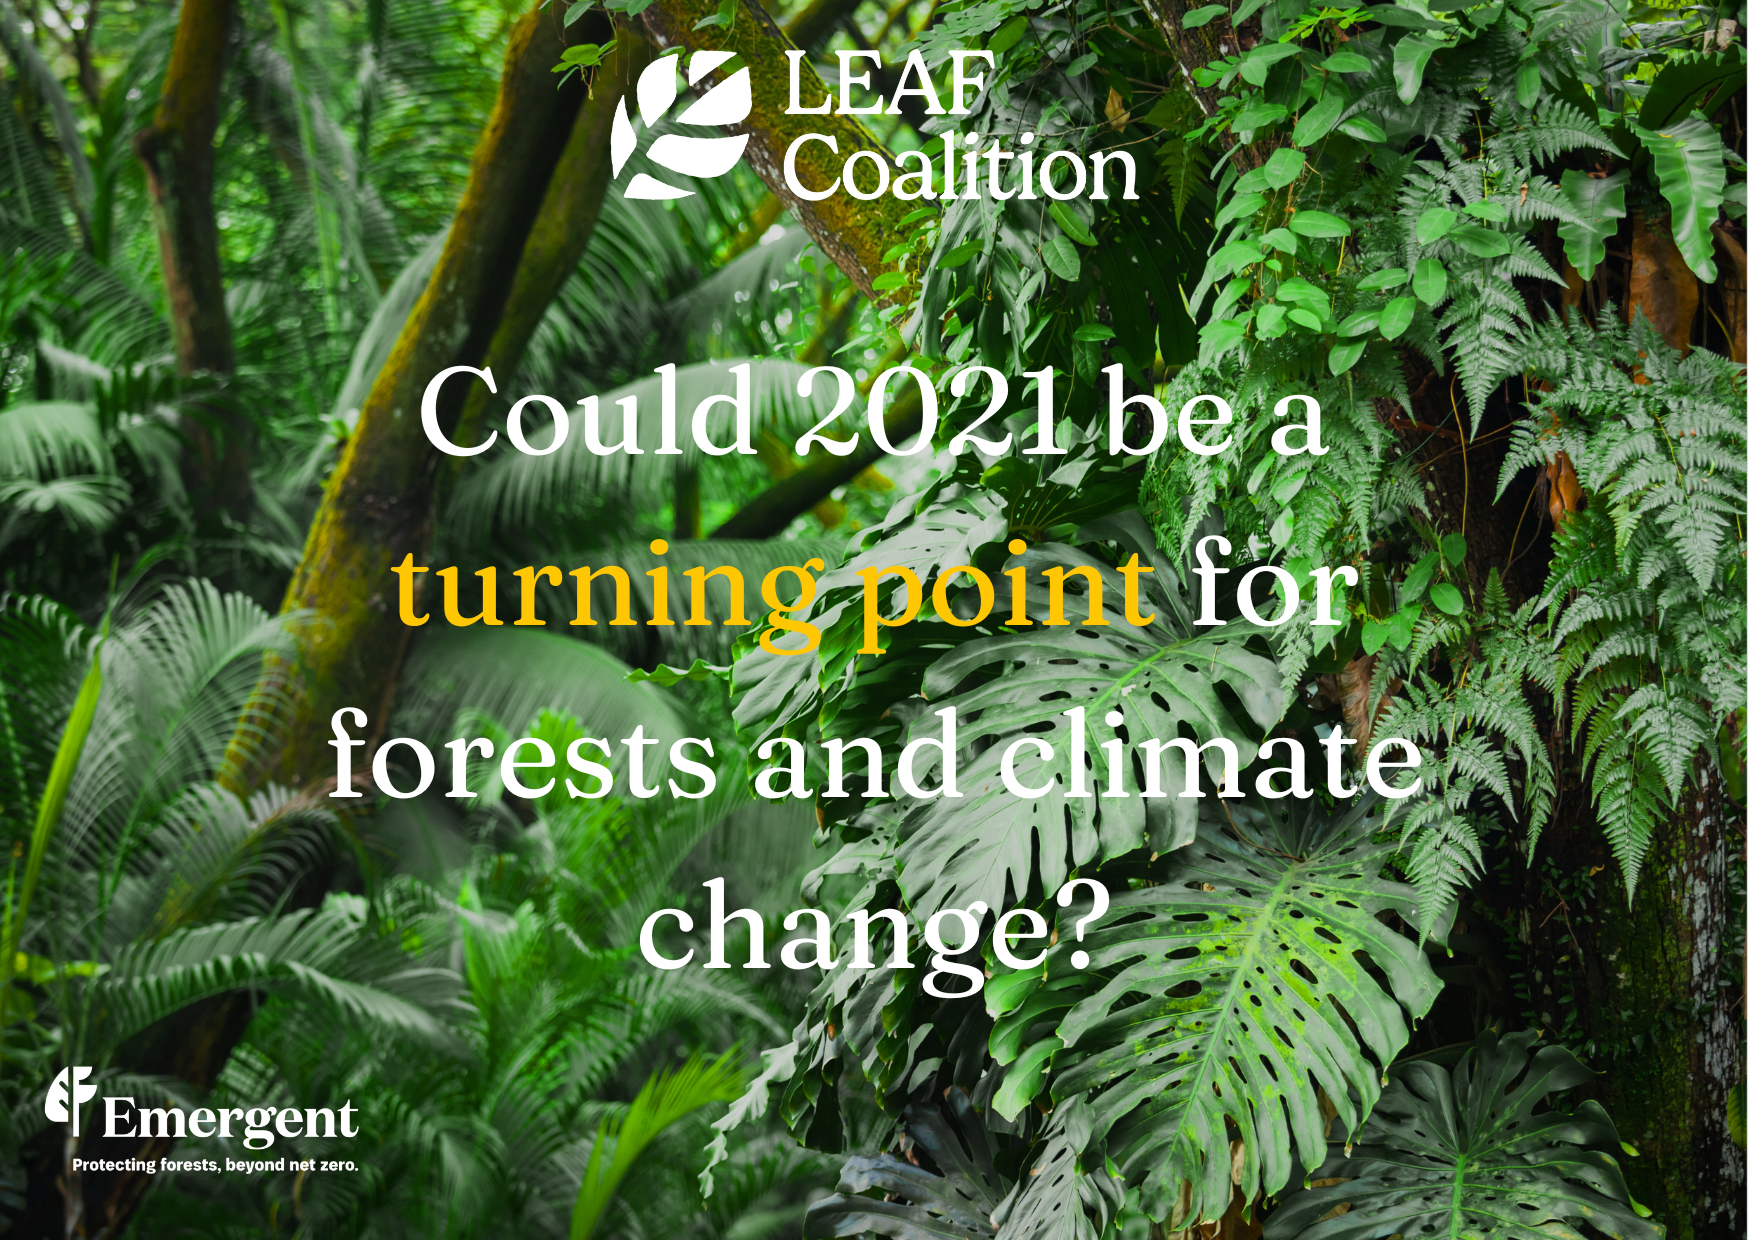 Could 2021 be a turning point for forests and climate change?